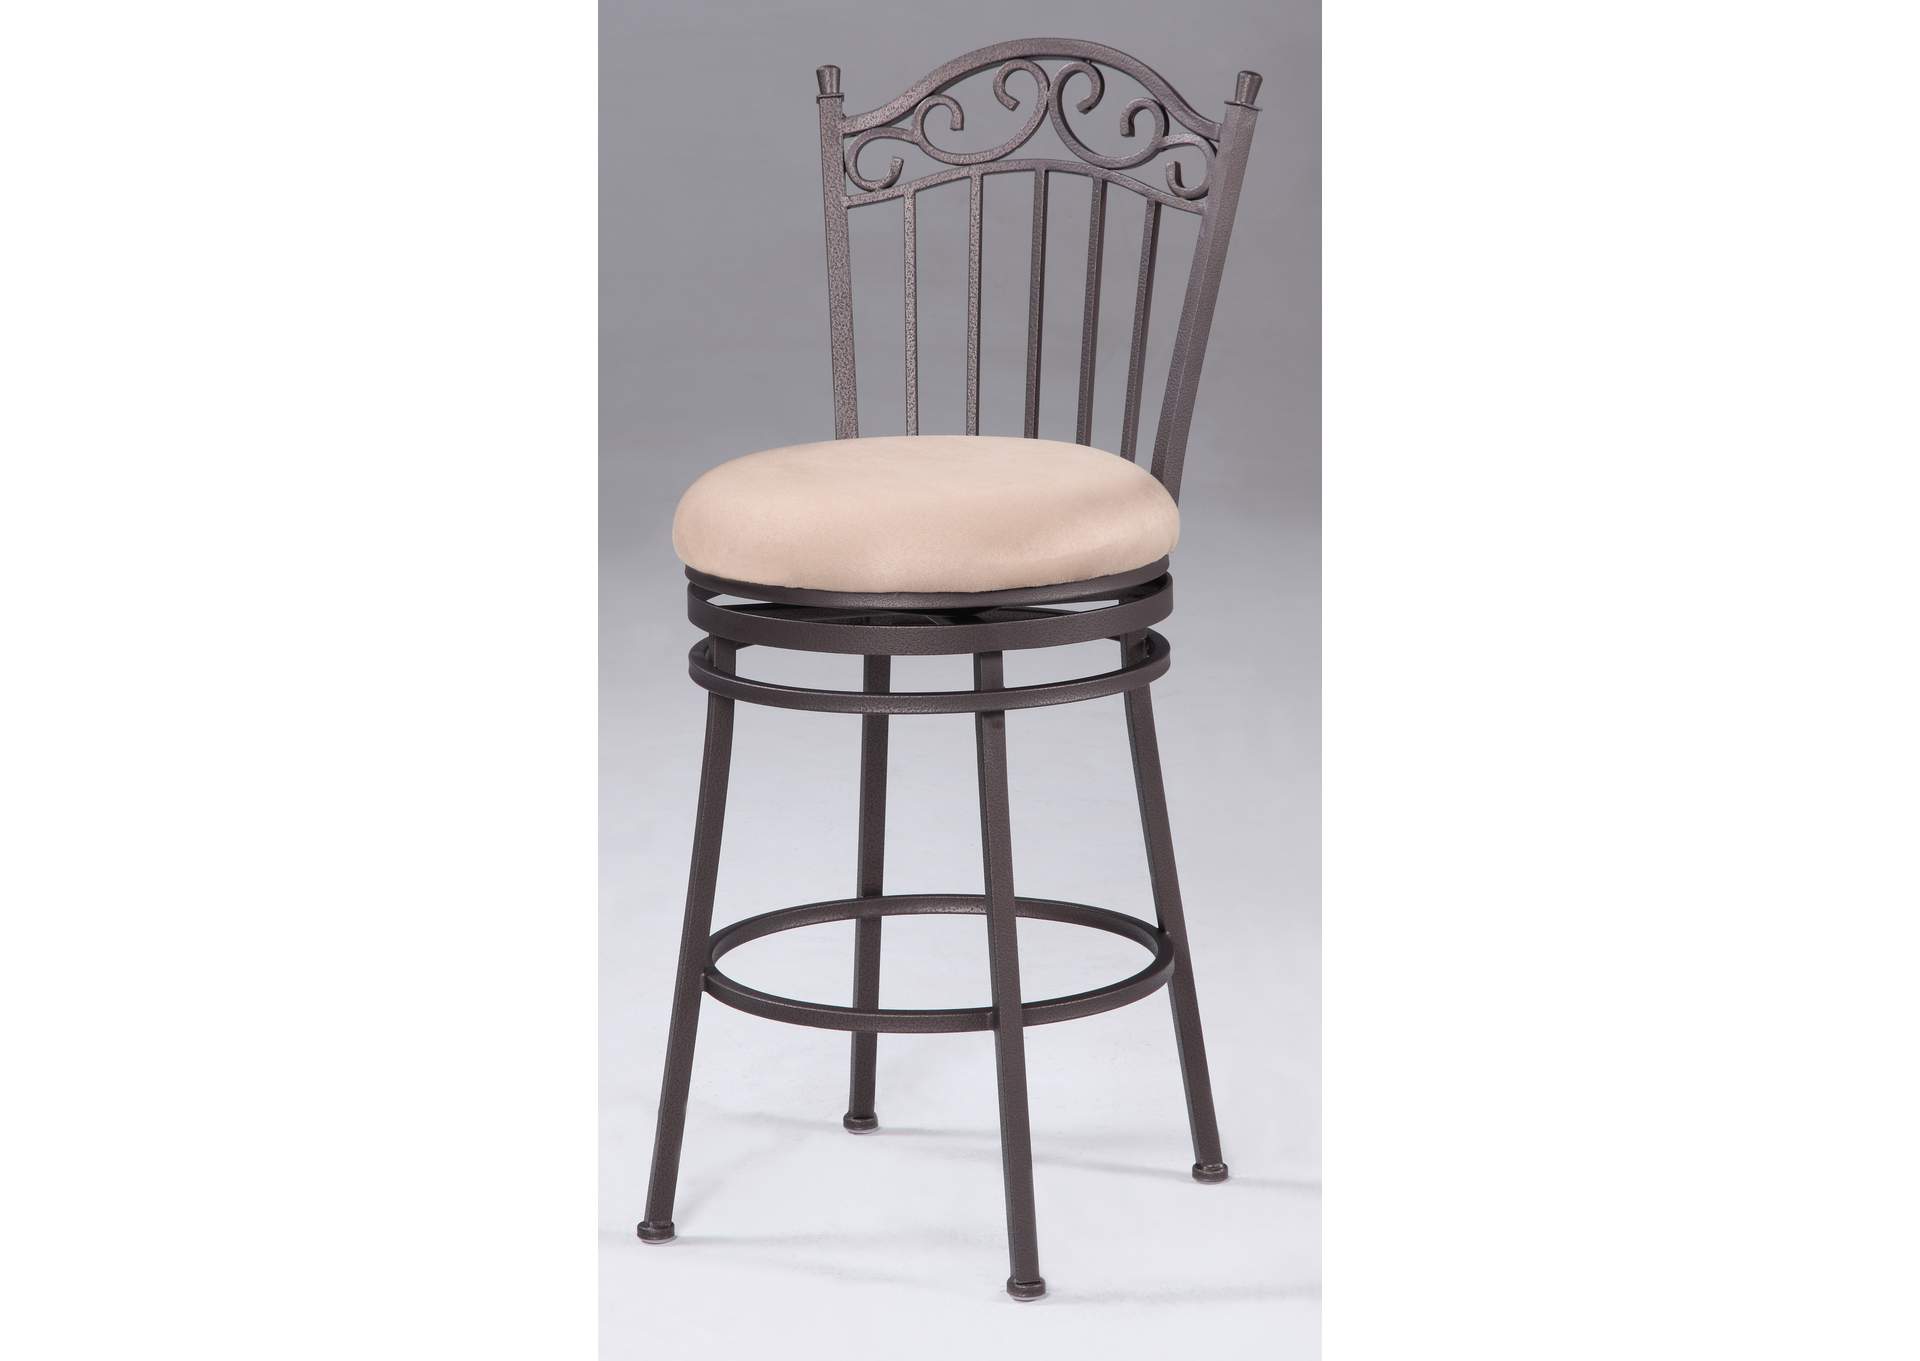 Counter Height Stool With Memory Return Swivel,Chintaly Imports